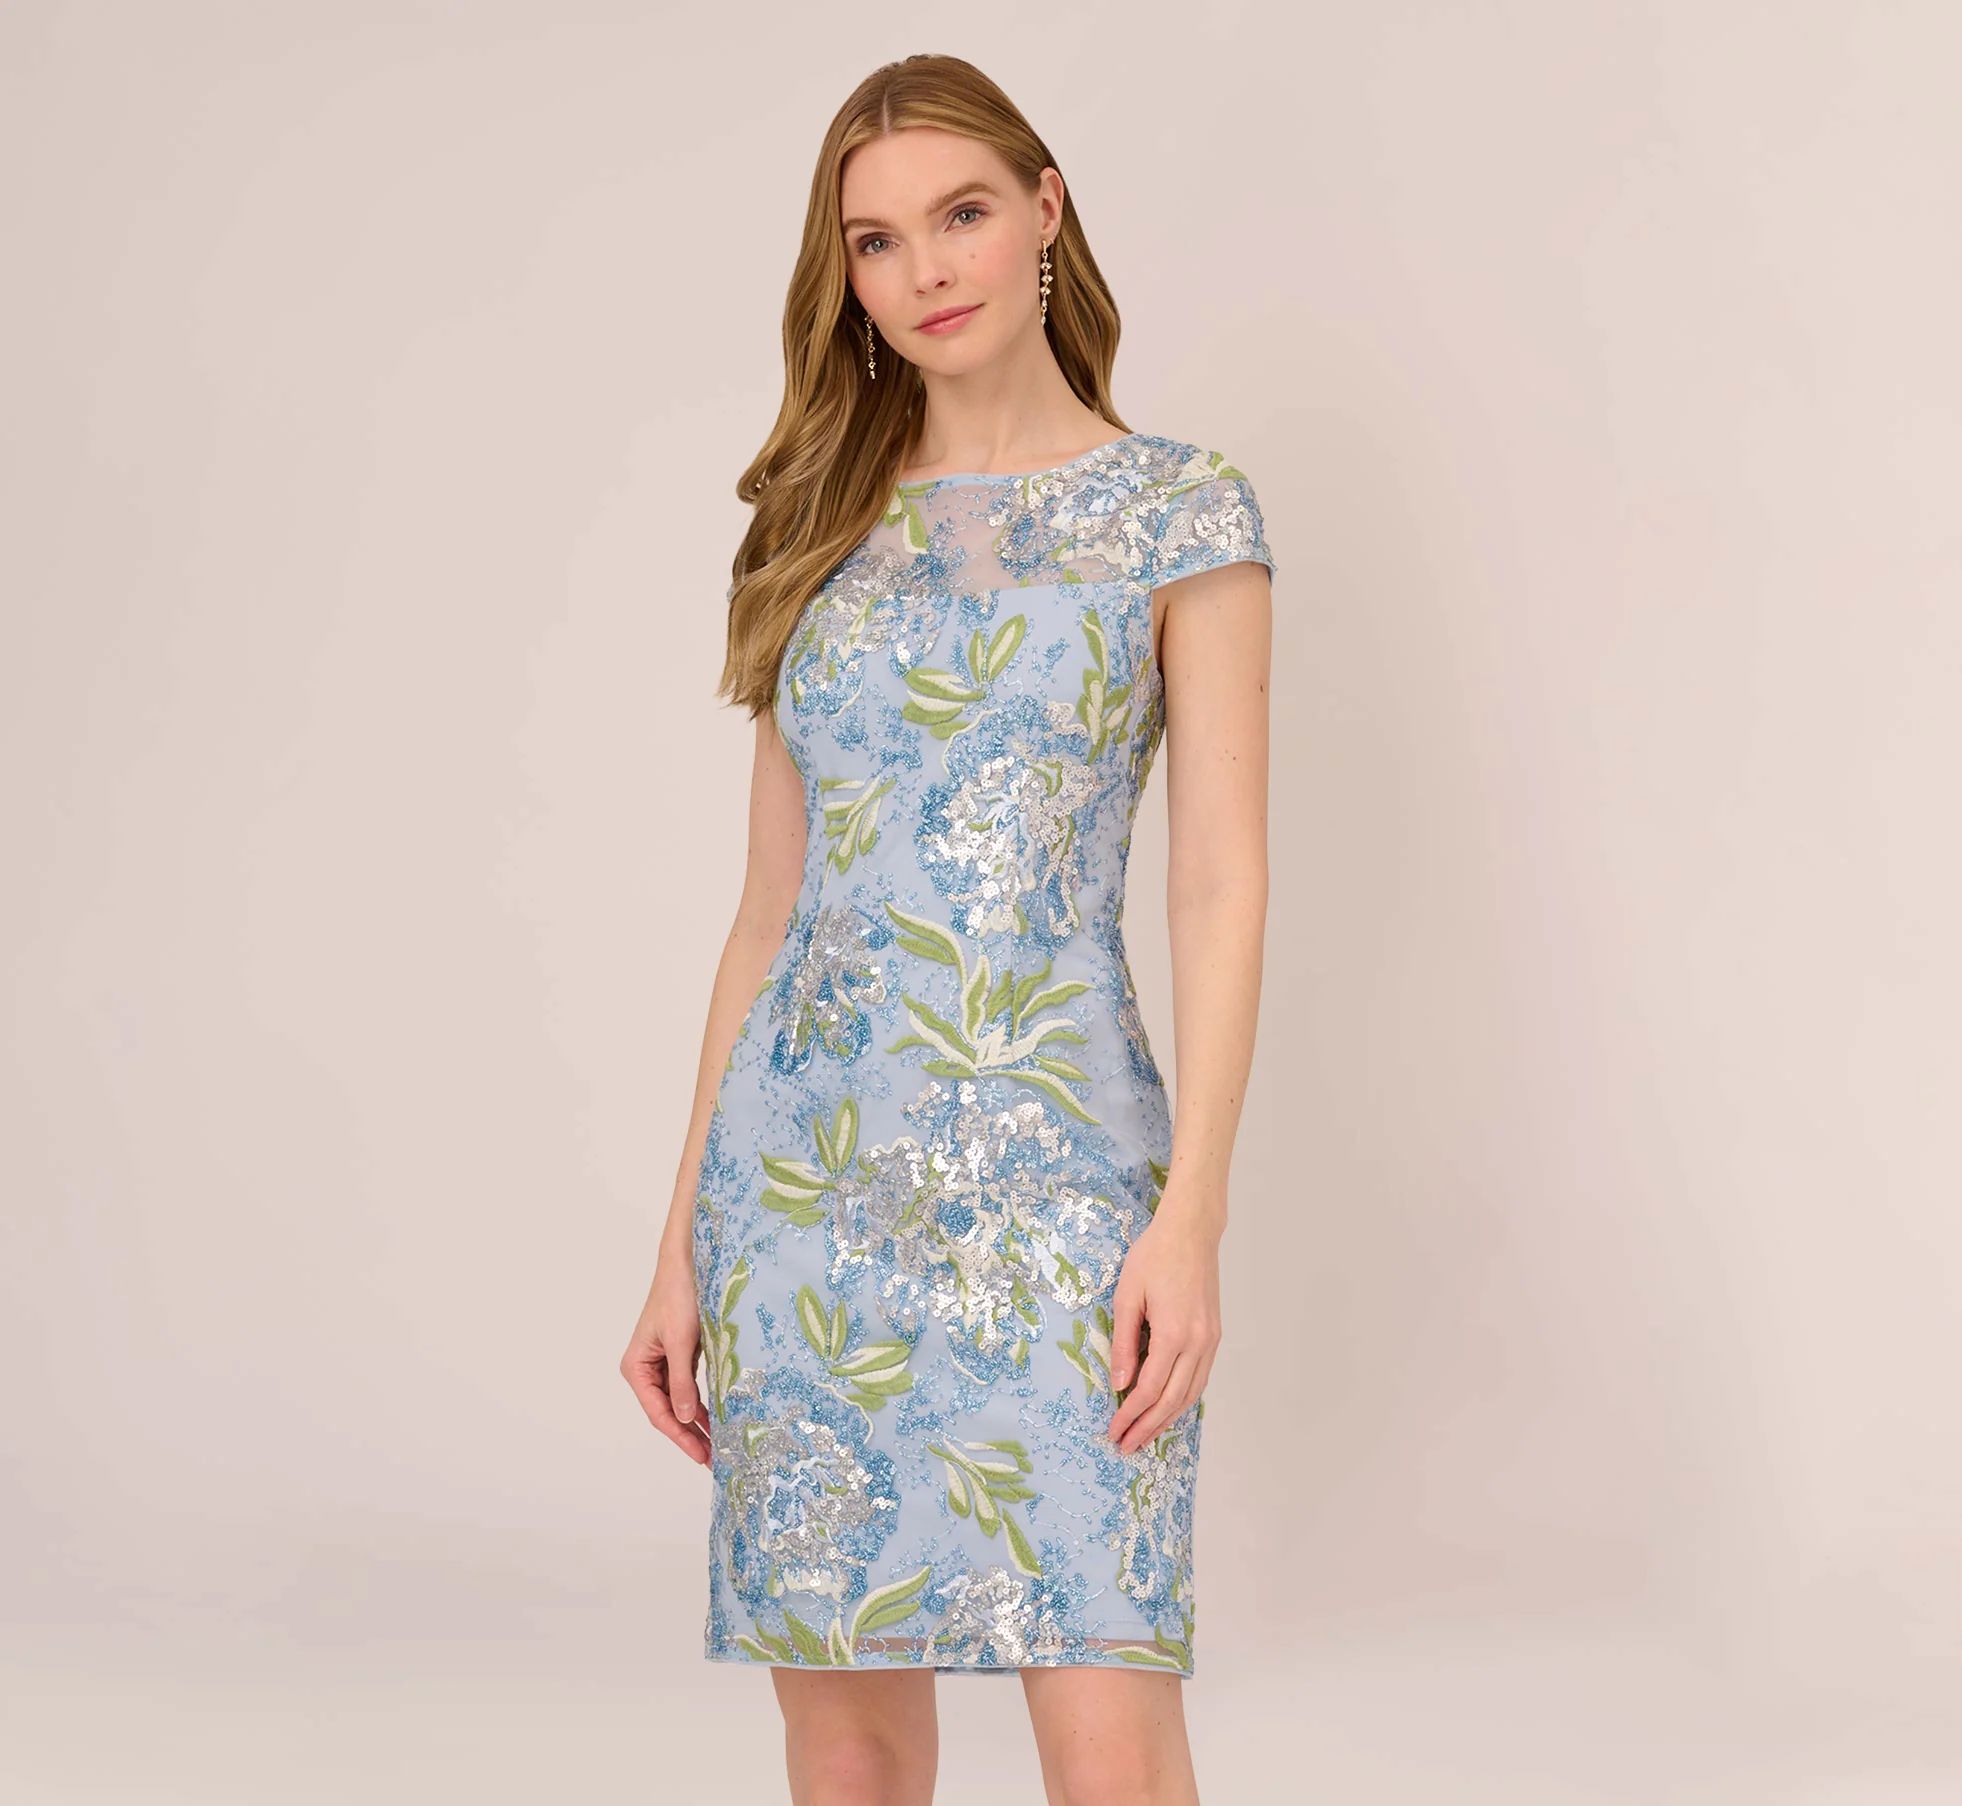 Sequin Floral Embroidered Sheath Dress With Cap Sleeves In Blue Green Multi | Adrianna Papell